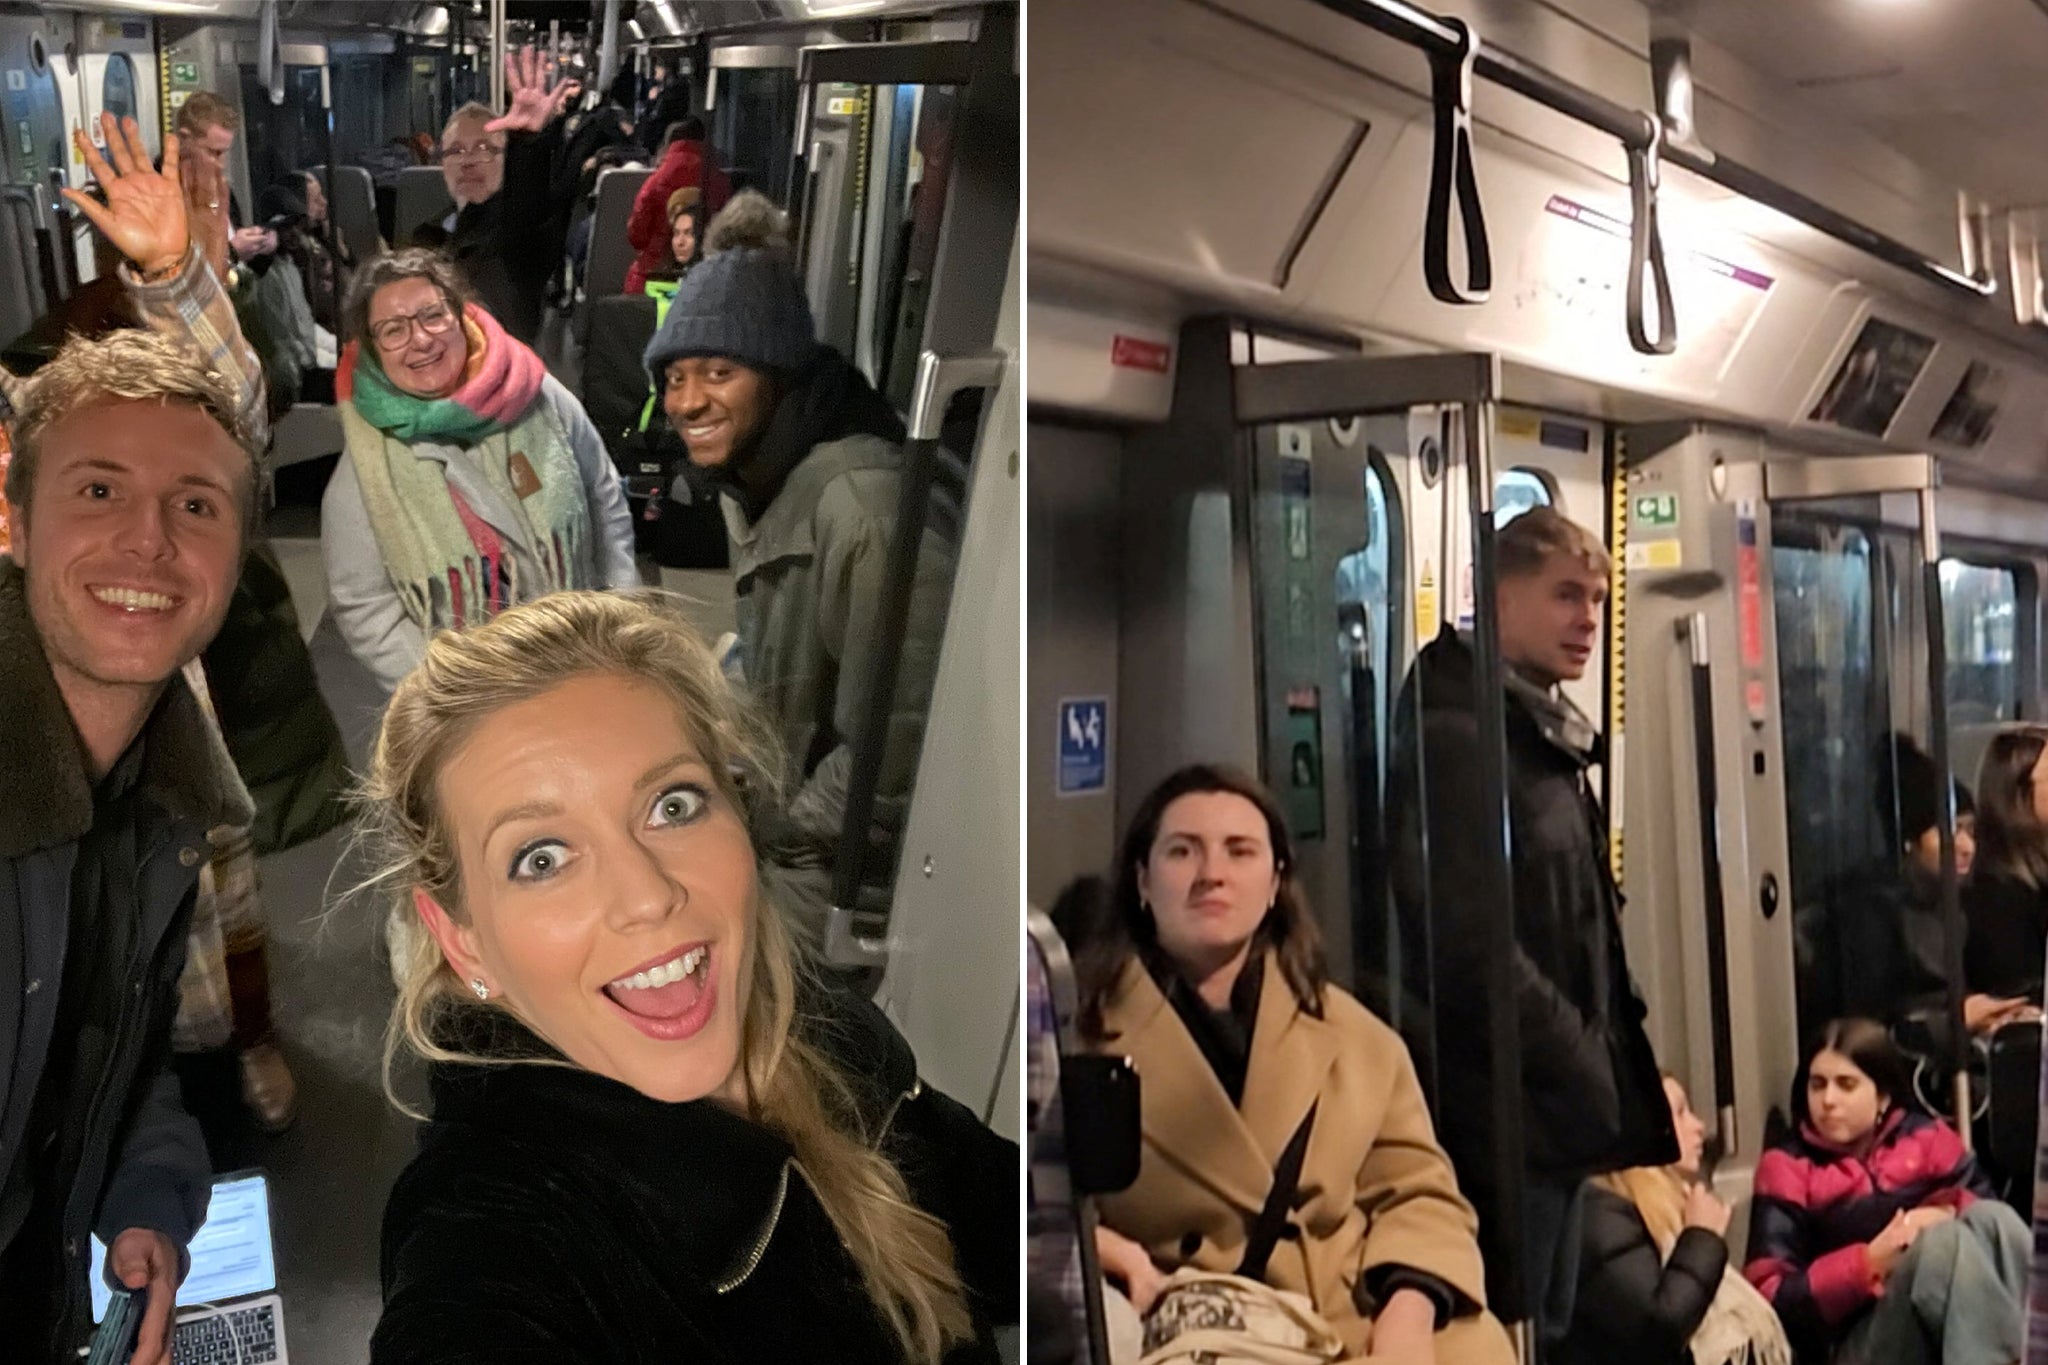 The presence of James Blunt and Rachel Riley on board an Elizabeth line train that was stuck in the cold and dark wasn’t enough to lift passengers’ spirits